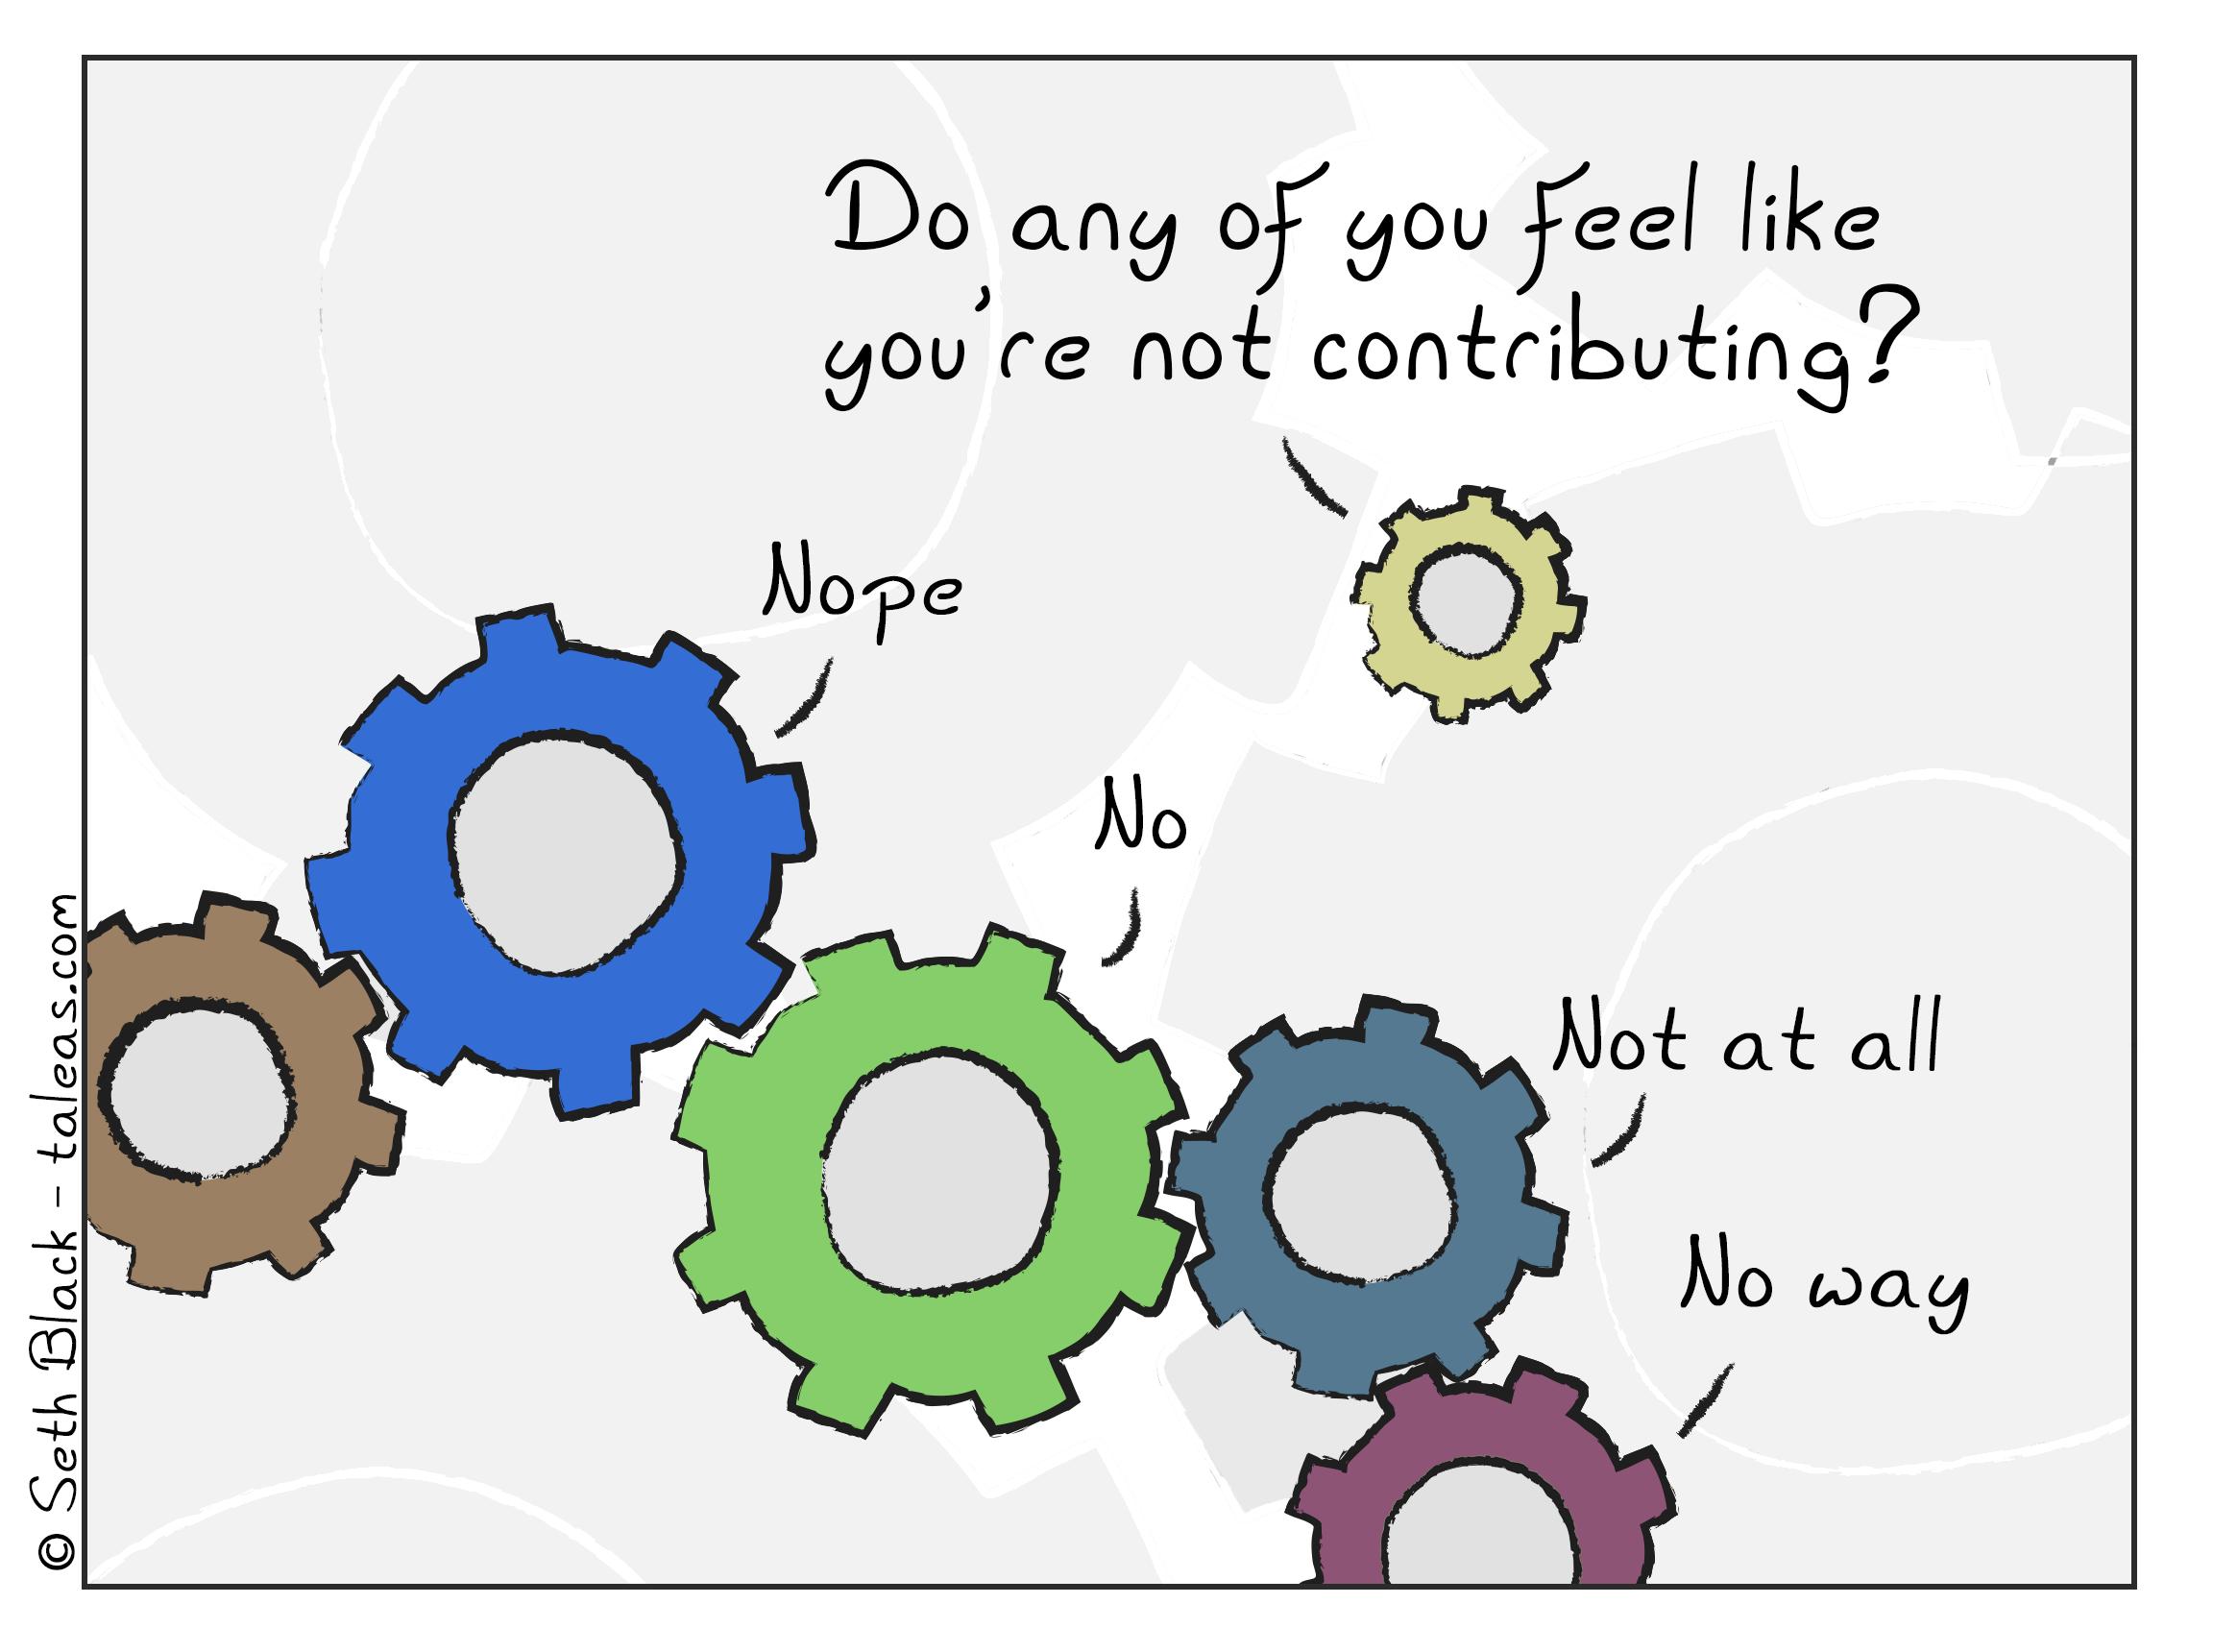 A machine with numerous interconnected cogs, except one. The disconnected cog asks wonders aloud, "You guys ever feel like you're not contributing?" to which the others respond, "no".